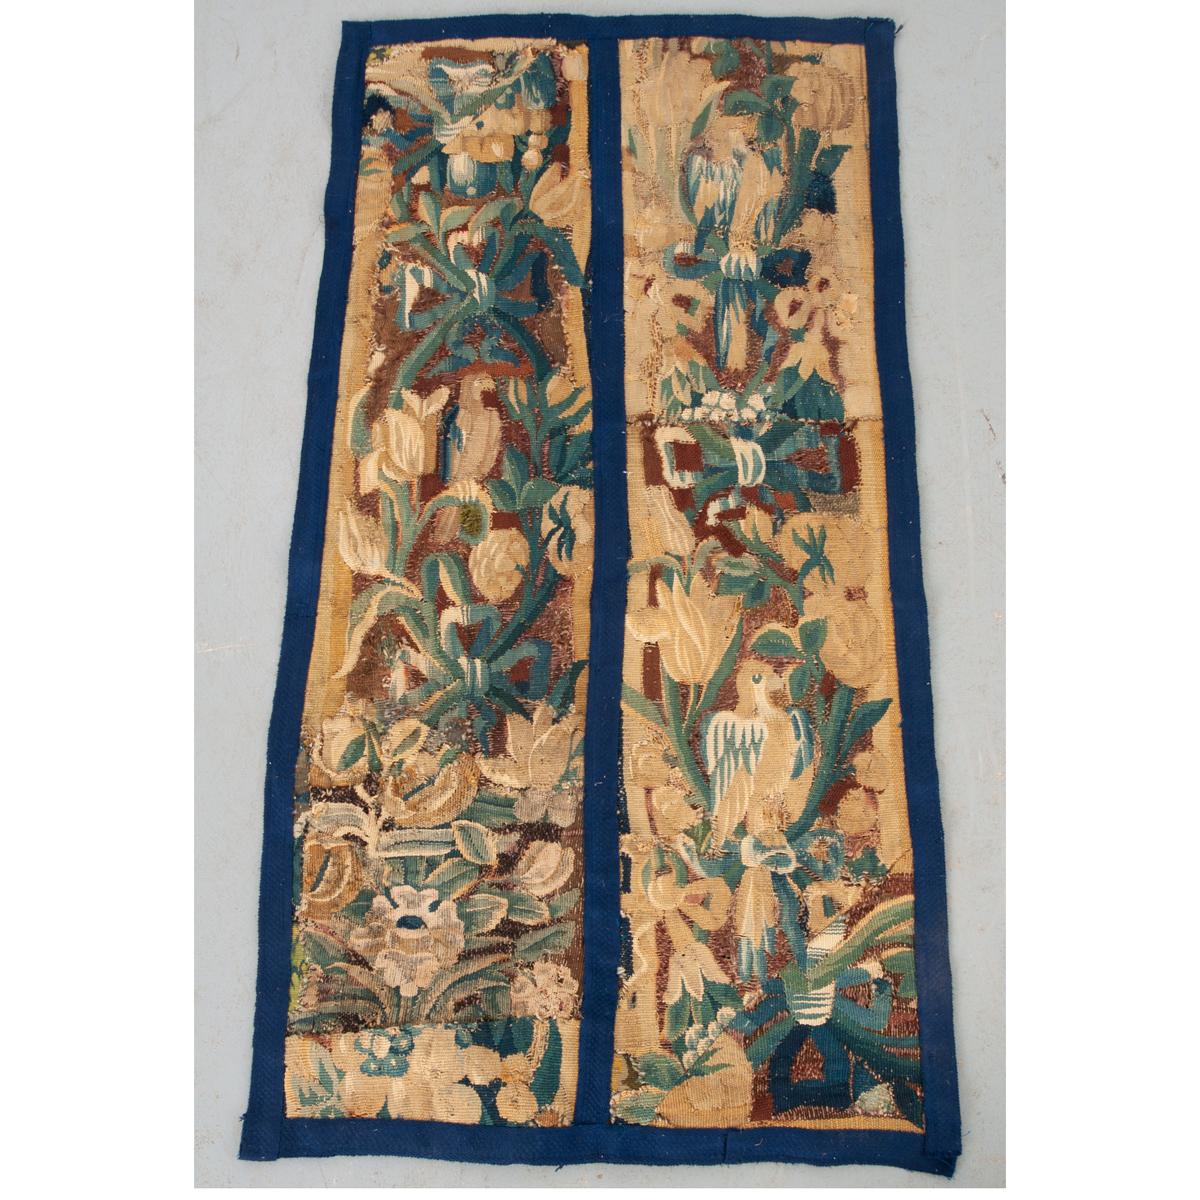 This vibrant tapestry fragment hails from 18th century France. Two panels have been recently attached with brilliant blue trimming. The fabric is worn but retains its vibrant floral motif and features a large perching bird. Make sure to view the